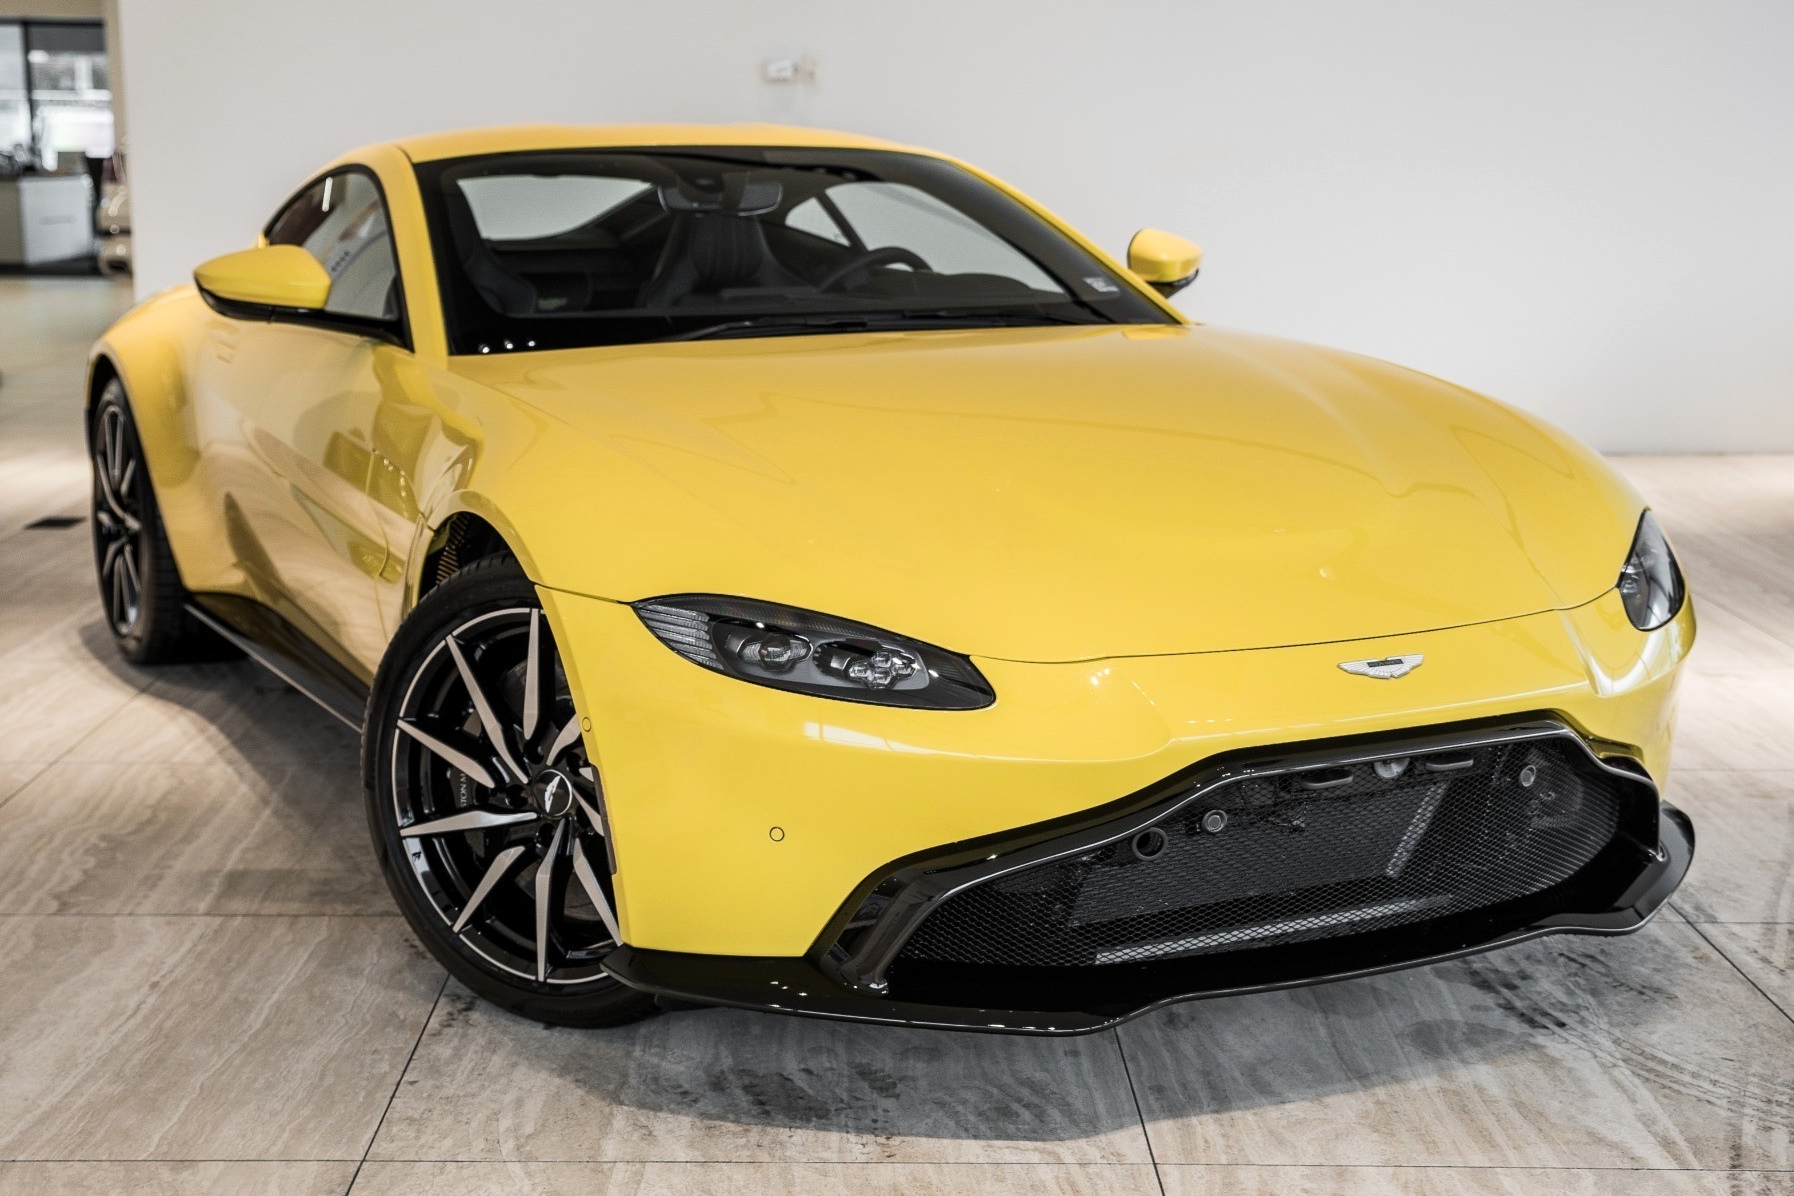 How Much Is An Aston Martin Vantage Coolest V12 V8 Cars With Prices